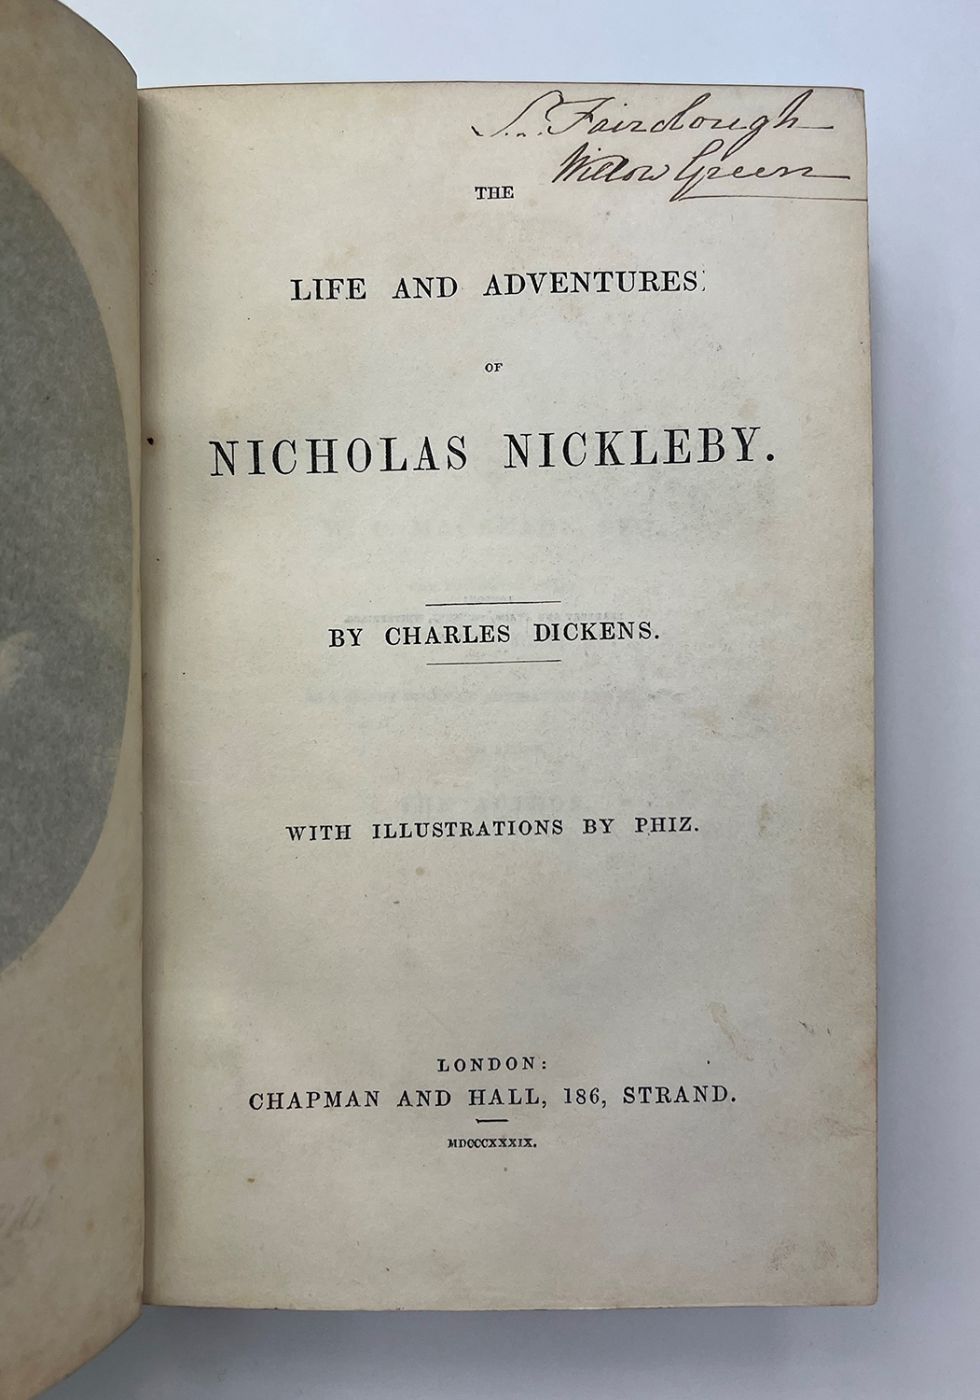 THE LIFE AND ADVENTURES OF NICHOLAS NICKLEBY -  image 4